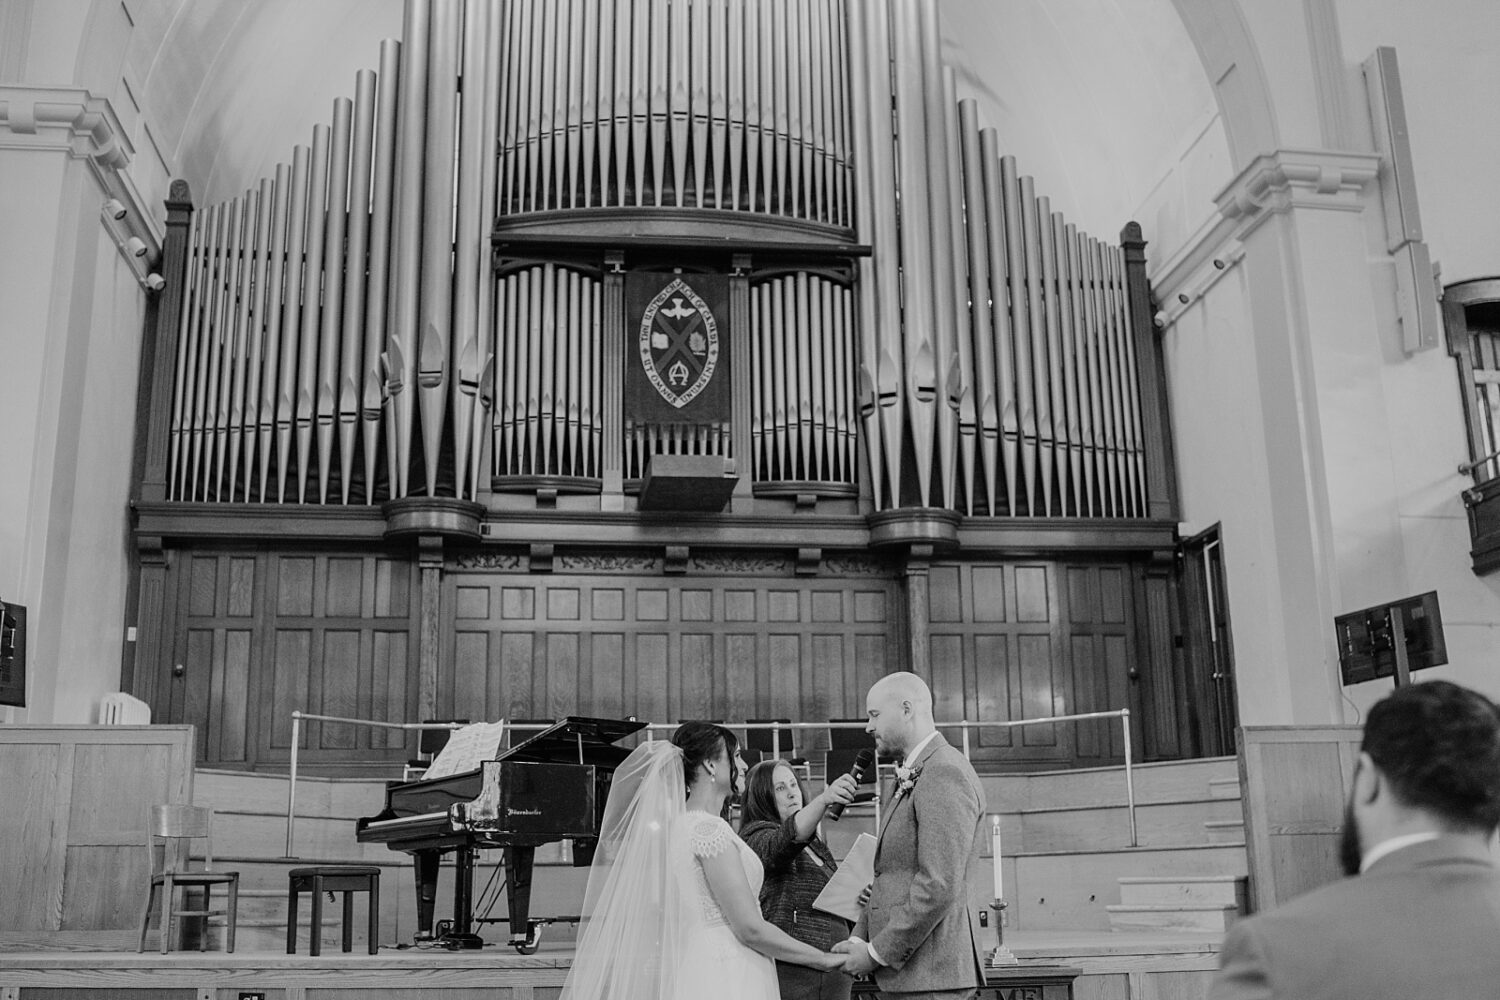 Edmonton wedding photographer bride and groom saying vows at McDougall Church